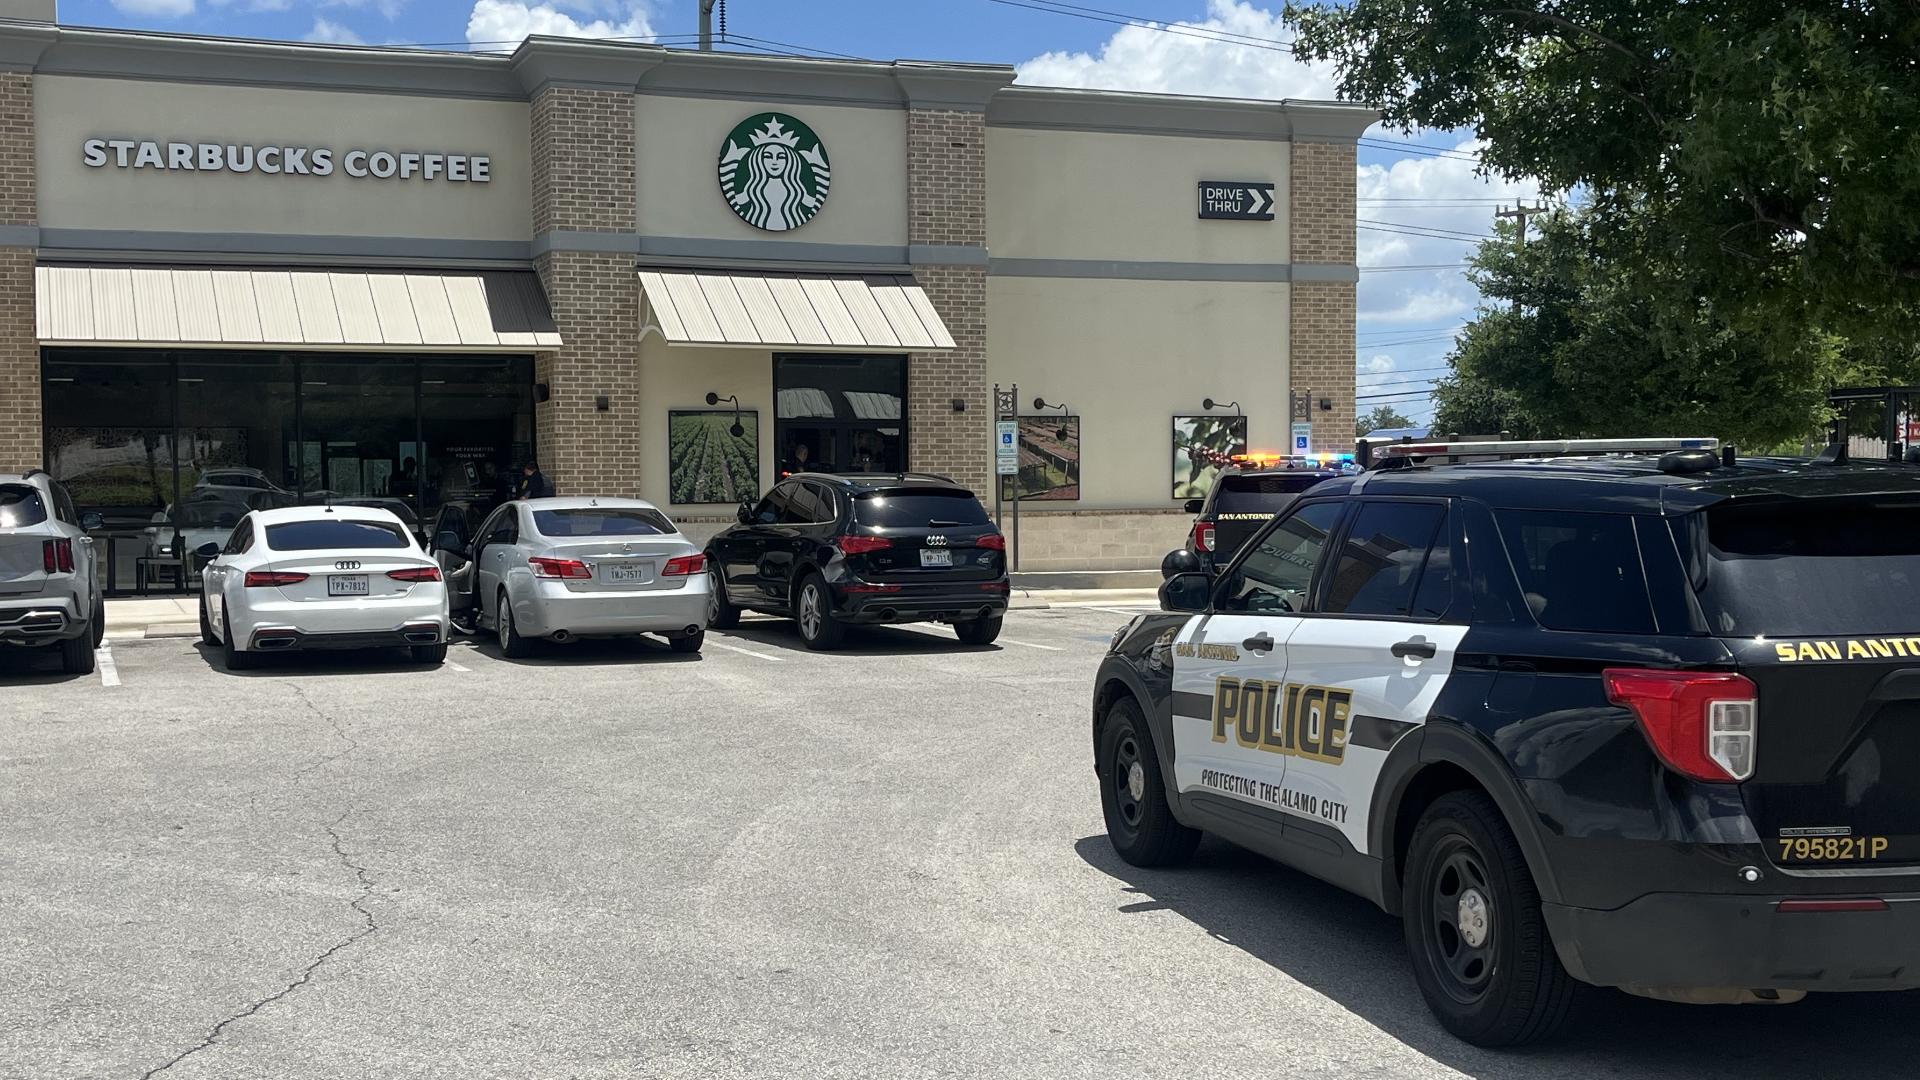 Police said the preliminary investigation shows that the suspects entered the Starbucks, pointed a gun at the clerk and demanded money.